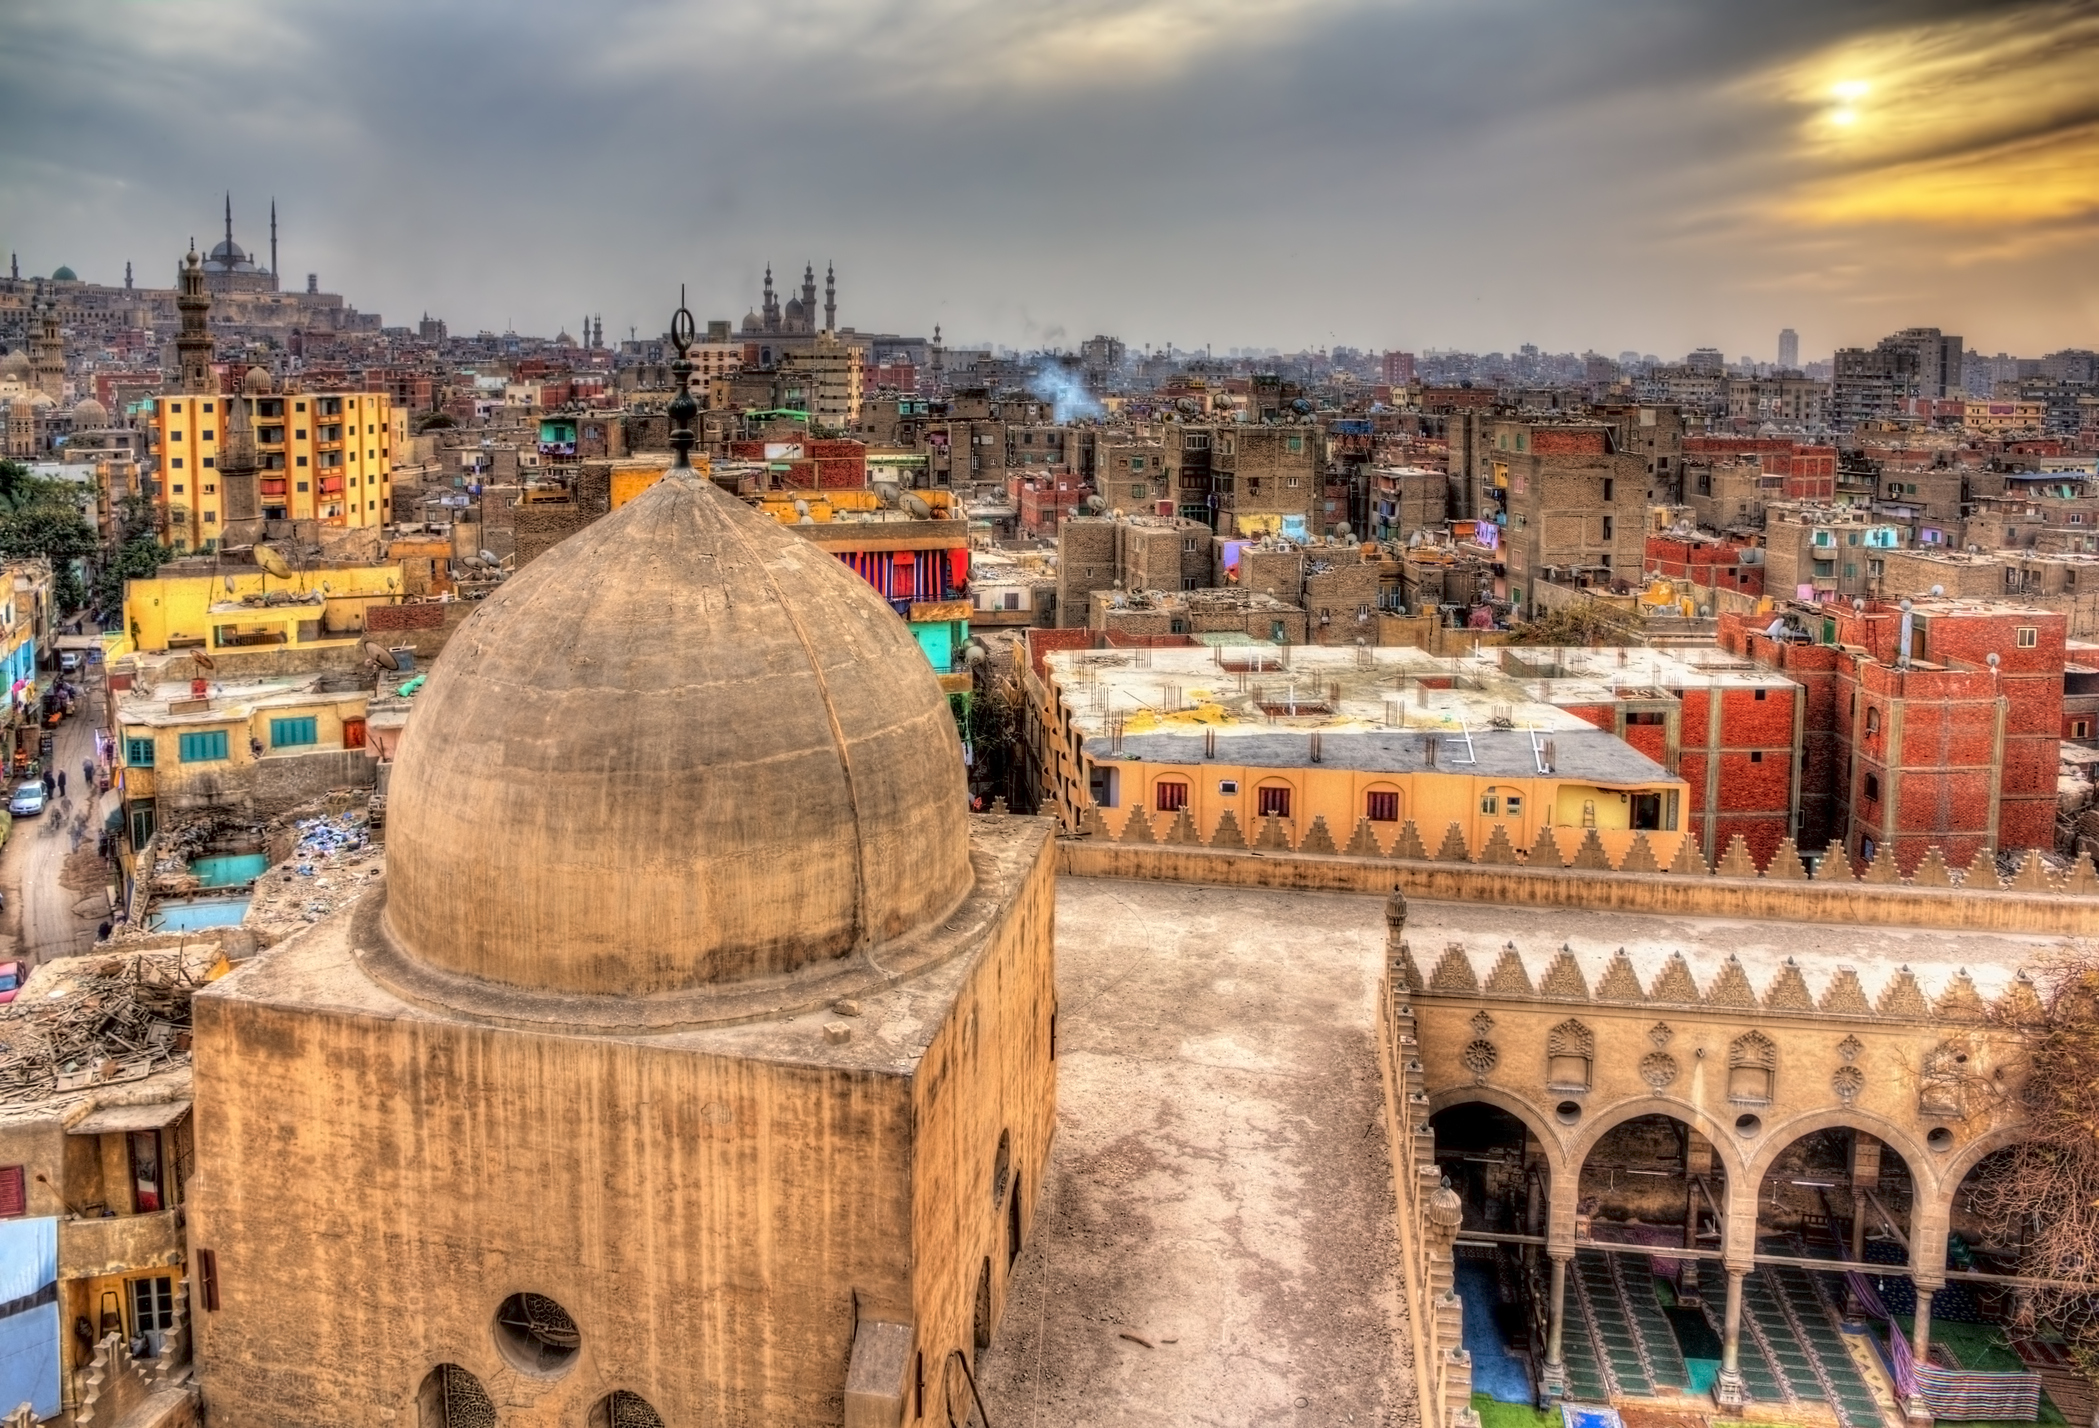 View of Cairo from roof of Amir al-Maridani mosque